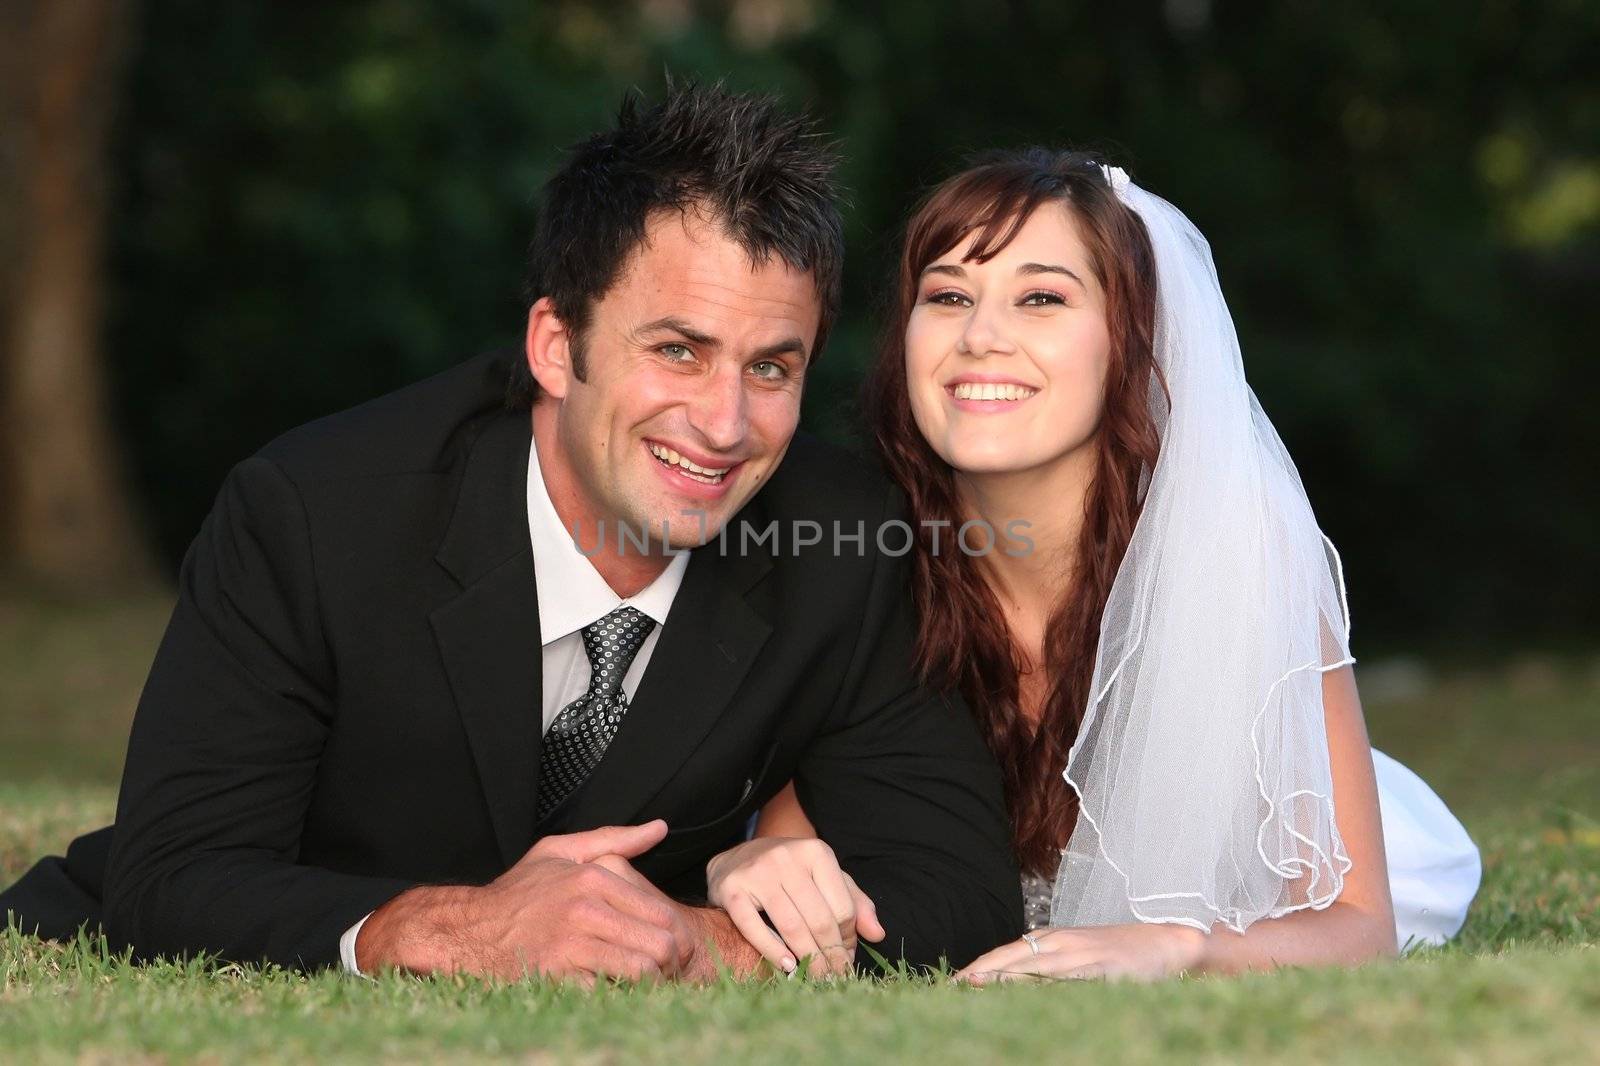 Beautiful smiling wedding couple laying down outdoors on the grass